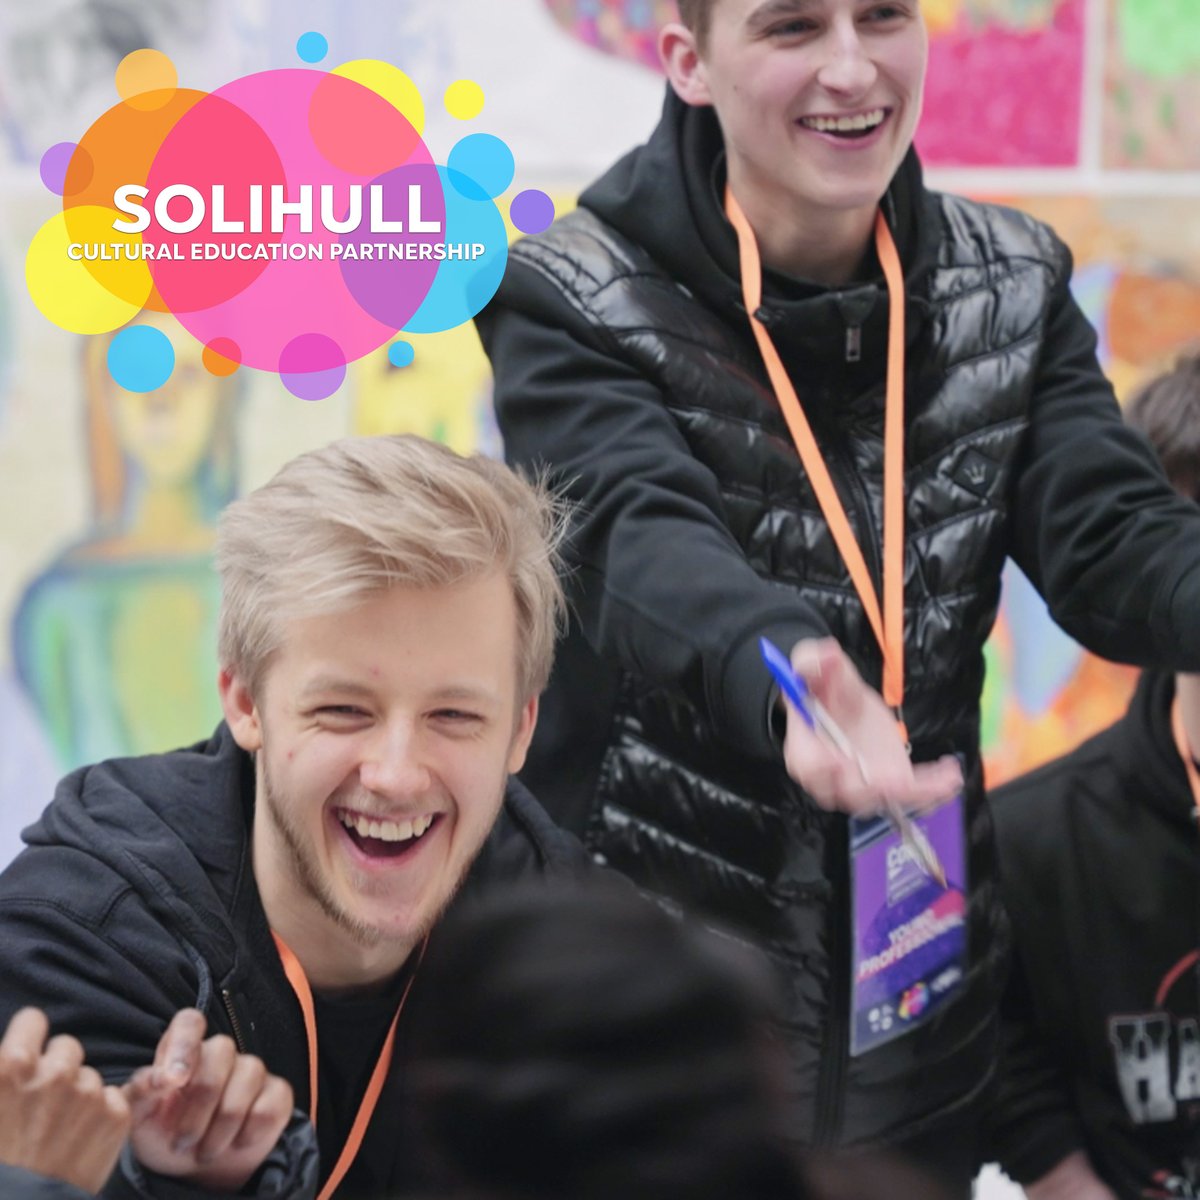 Are you a young person interested in a career in the creative industries? OR do you know someone who is? Join the @SolihullCEP_ (Cultural Education Partnership) at The Core on Tue 30 April 6pm for an informational evening. Find out more: thecoretheatresolihull.co.uk/whats-on/all-s…